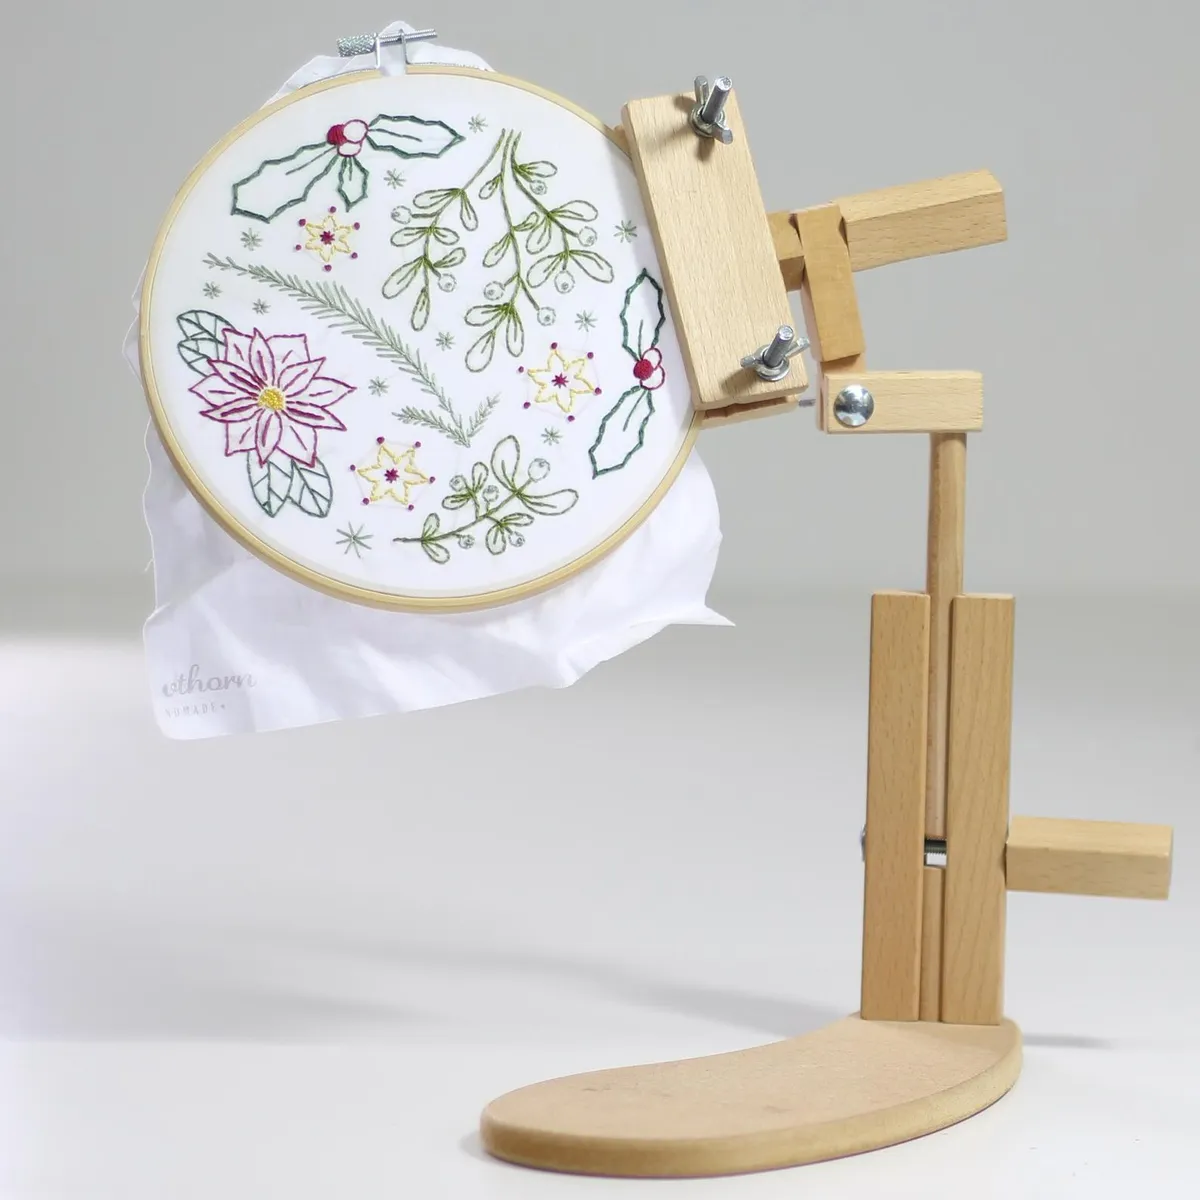 Quilting & Embroidery Hoop/Stand - arts & crafts - by owner - sale